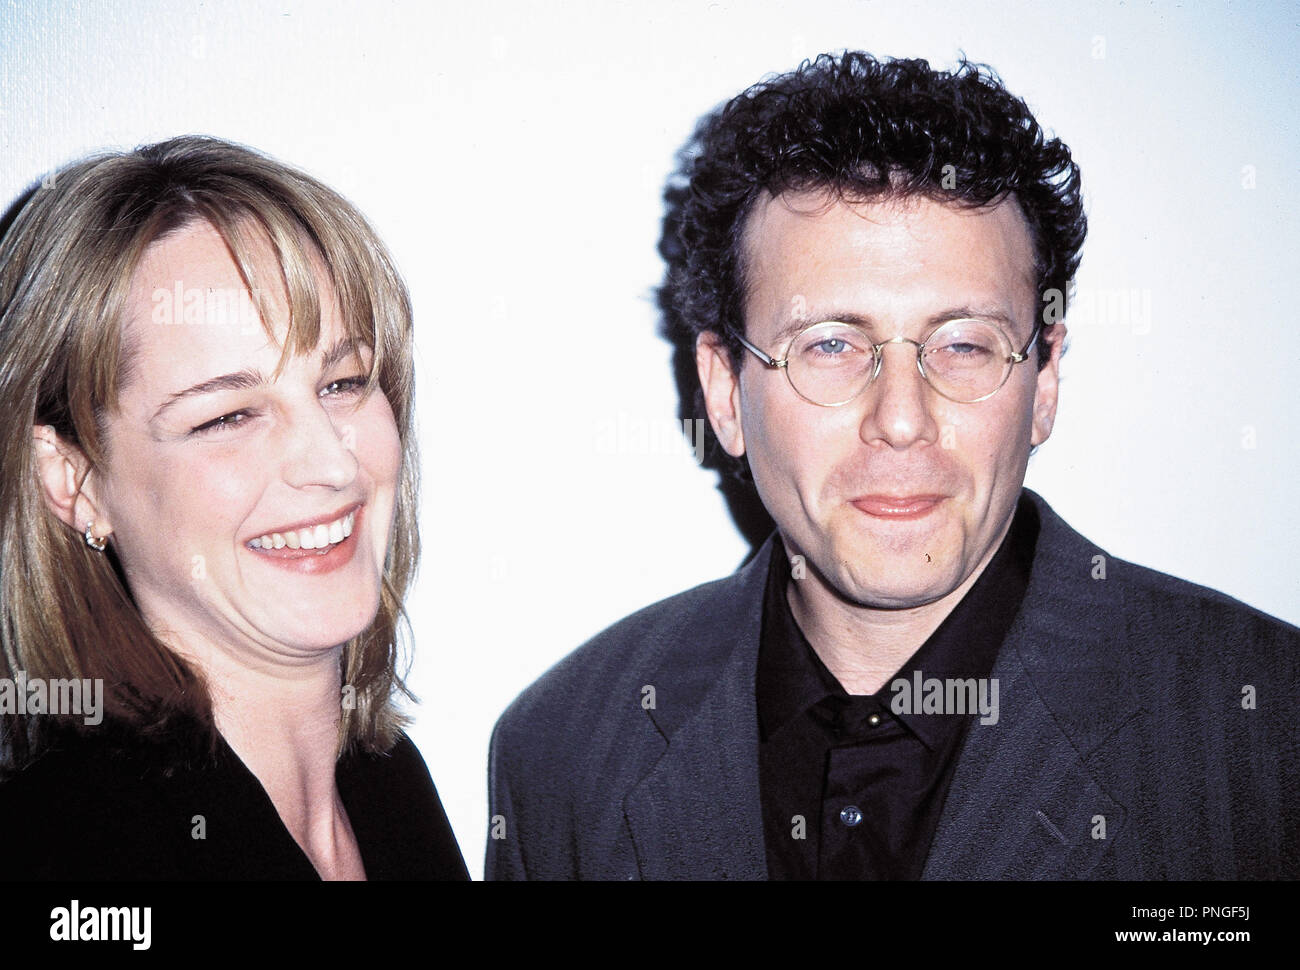 Original film title: MAD ABOUT YOU. English title: MAD ABOUT YOU. Year: 1992. Stars: PAUL REISER; HELEN HUNT. Credit: TRI STAR TELEVISION / Album Stock Photo